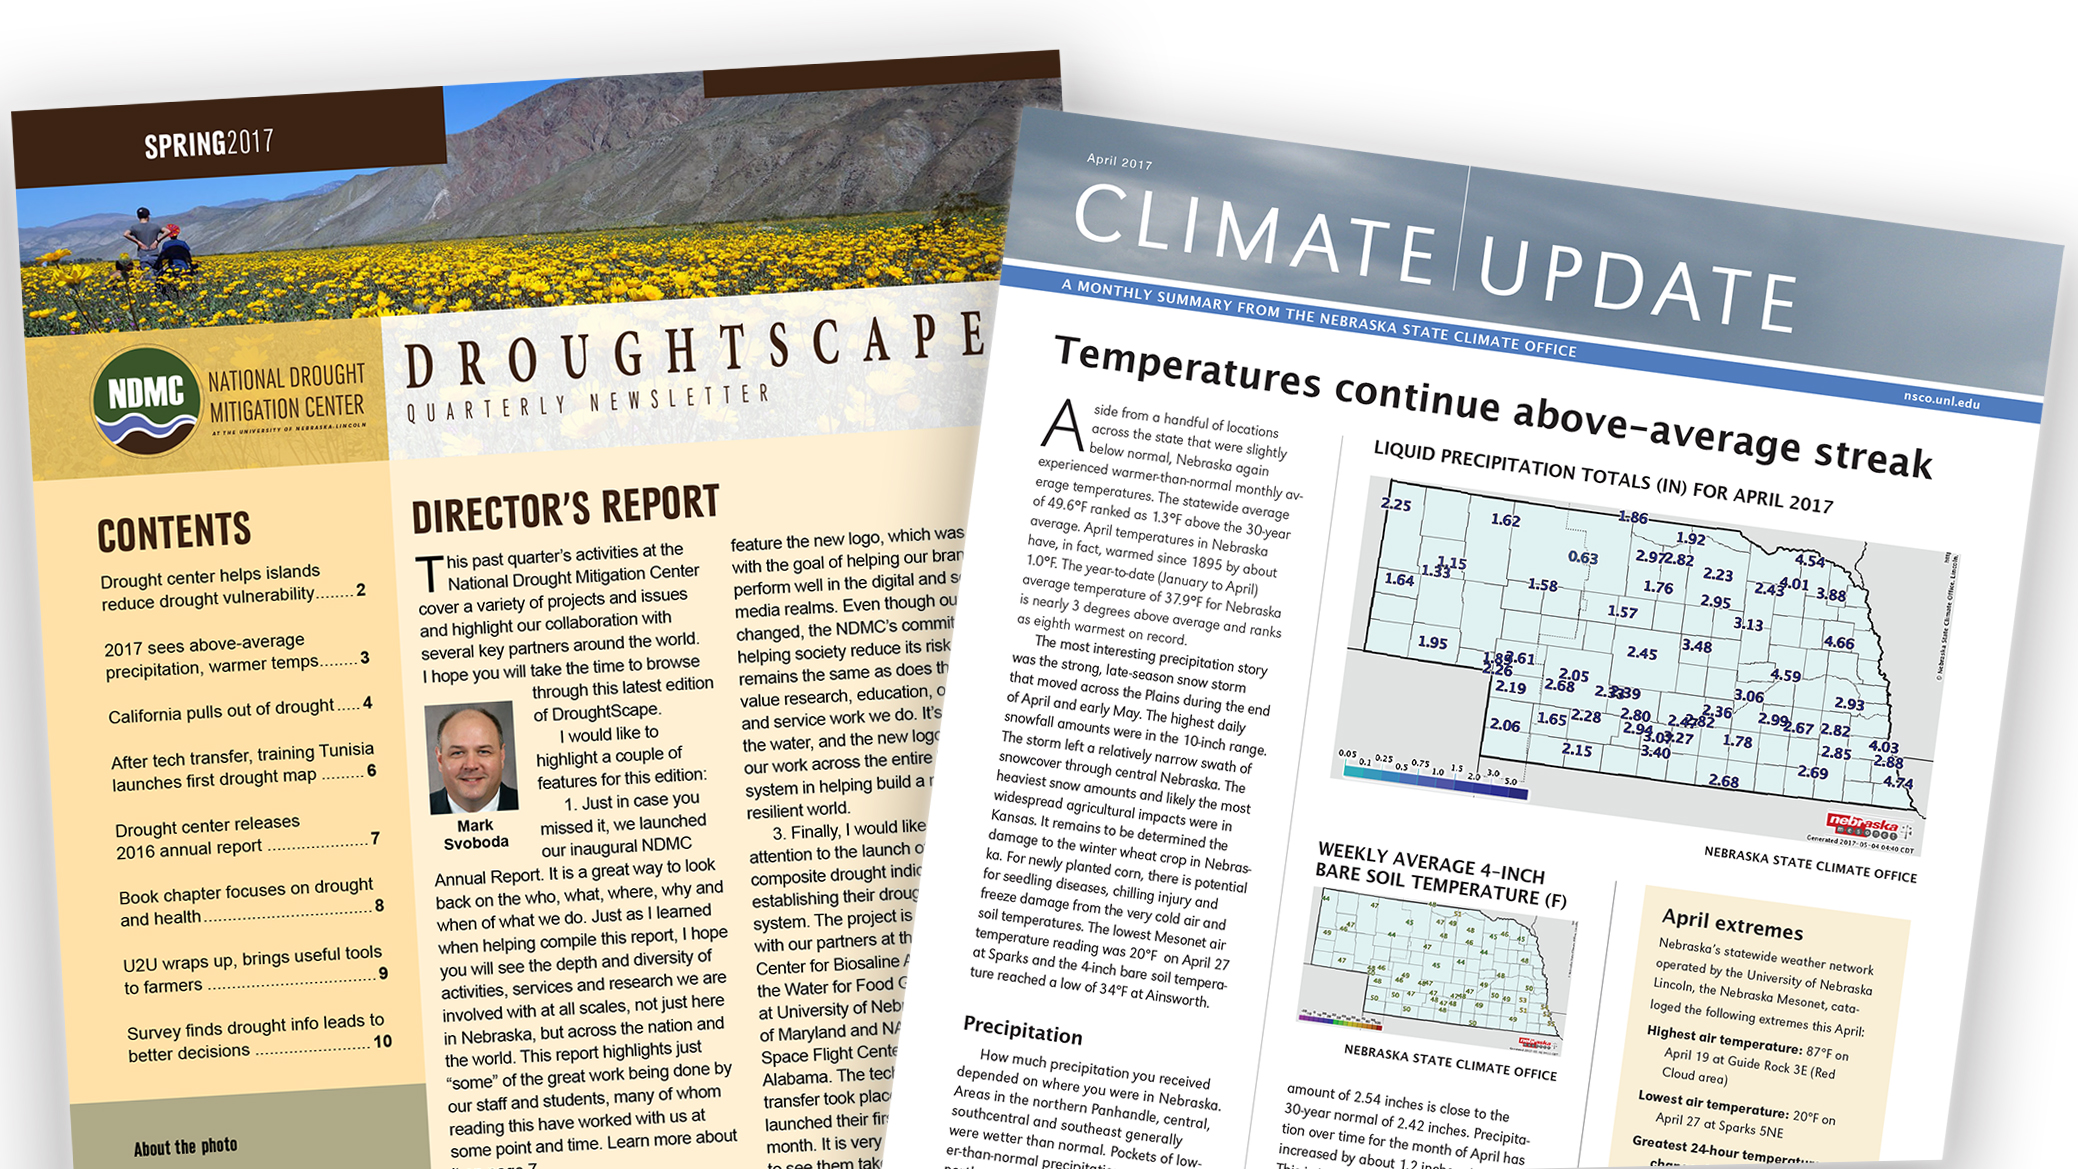 Climate and drought newsletters released.